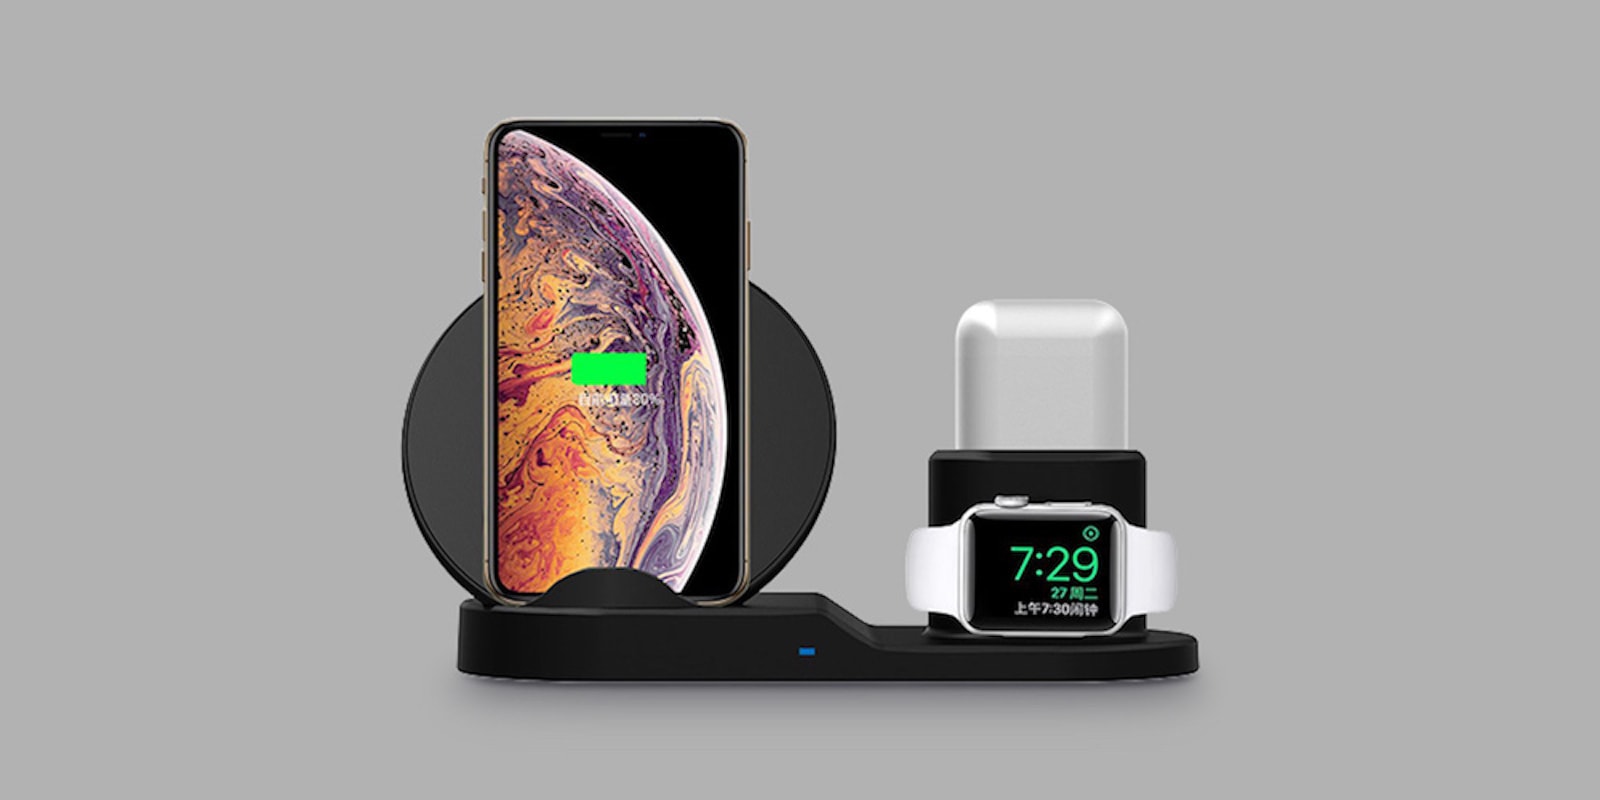 No need for a tangle of cables on your desk with this 3-in-1 wireless charging hub.